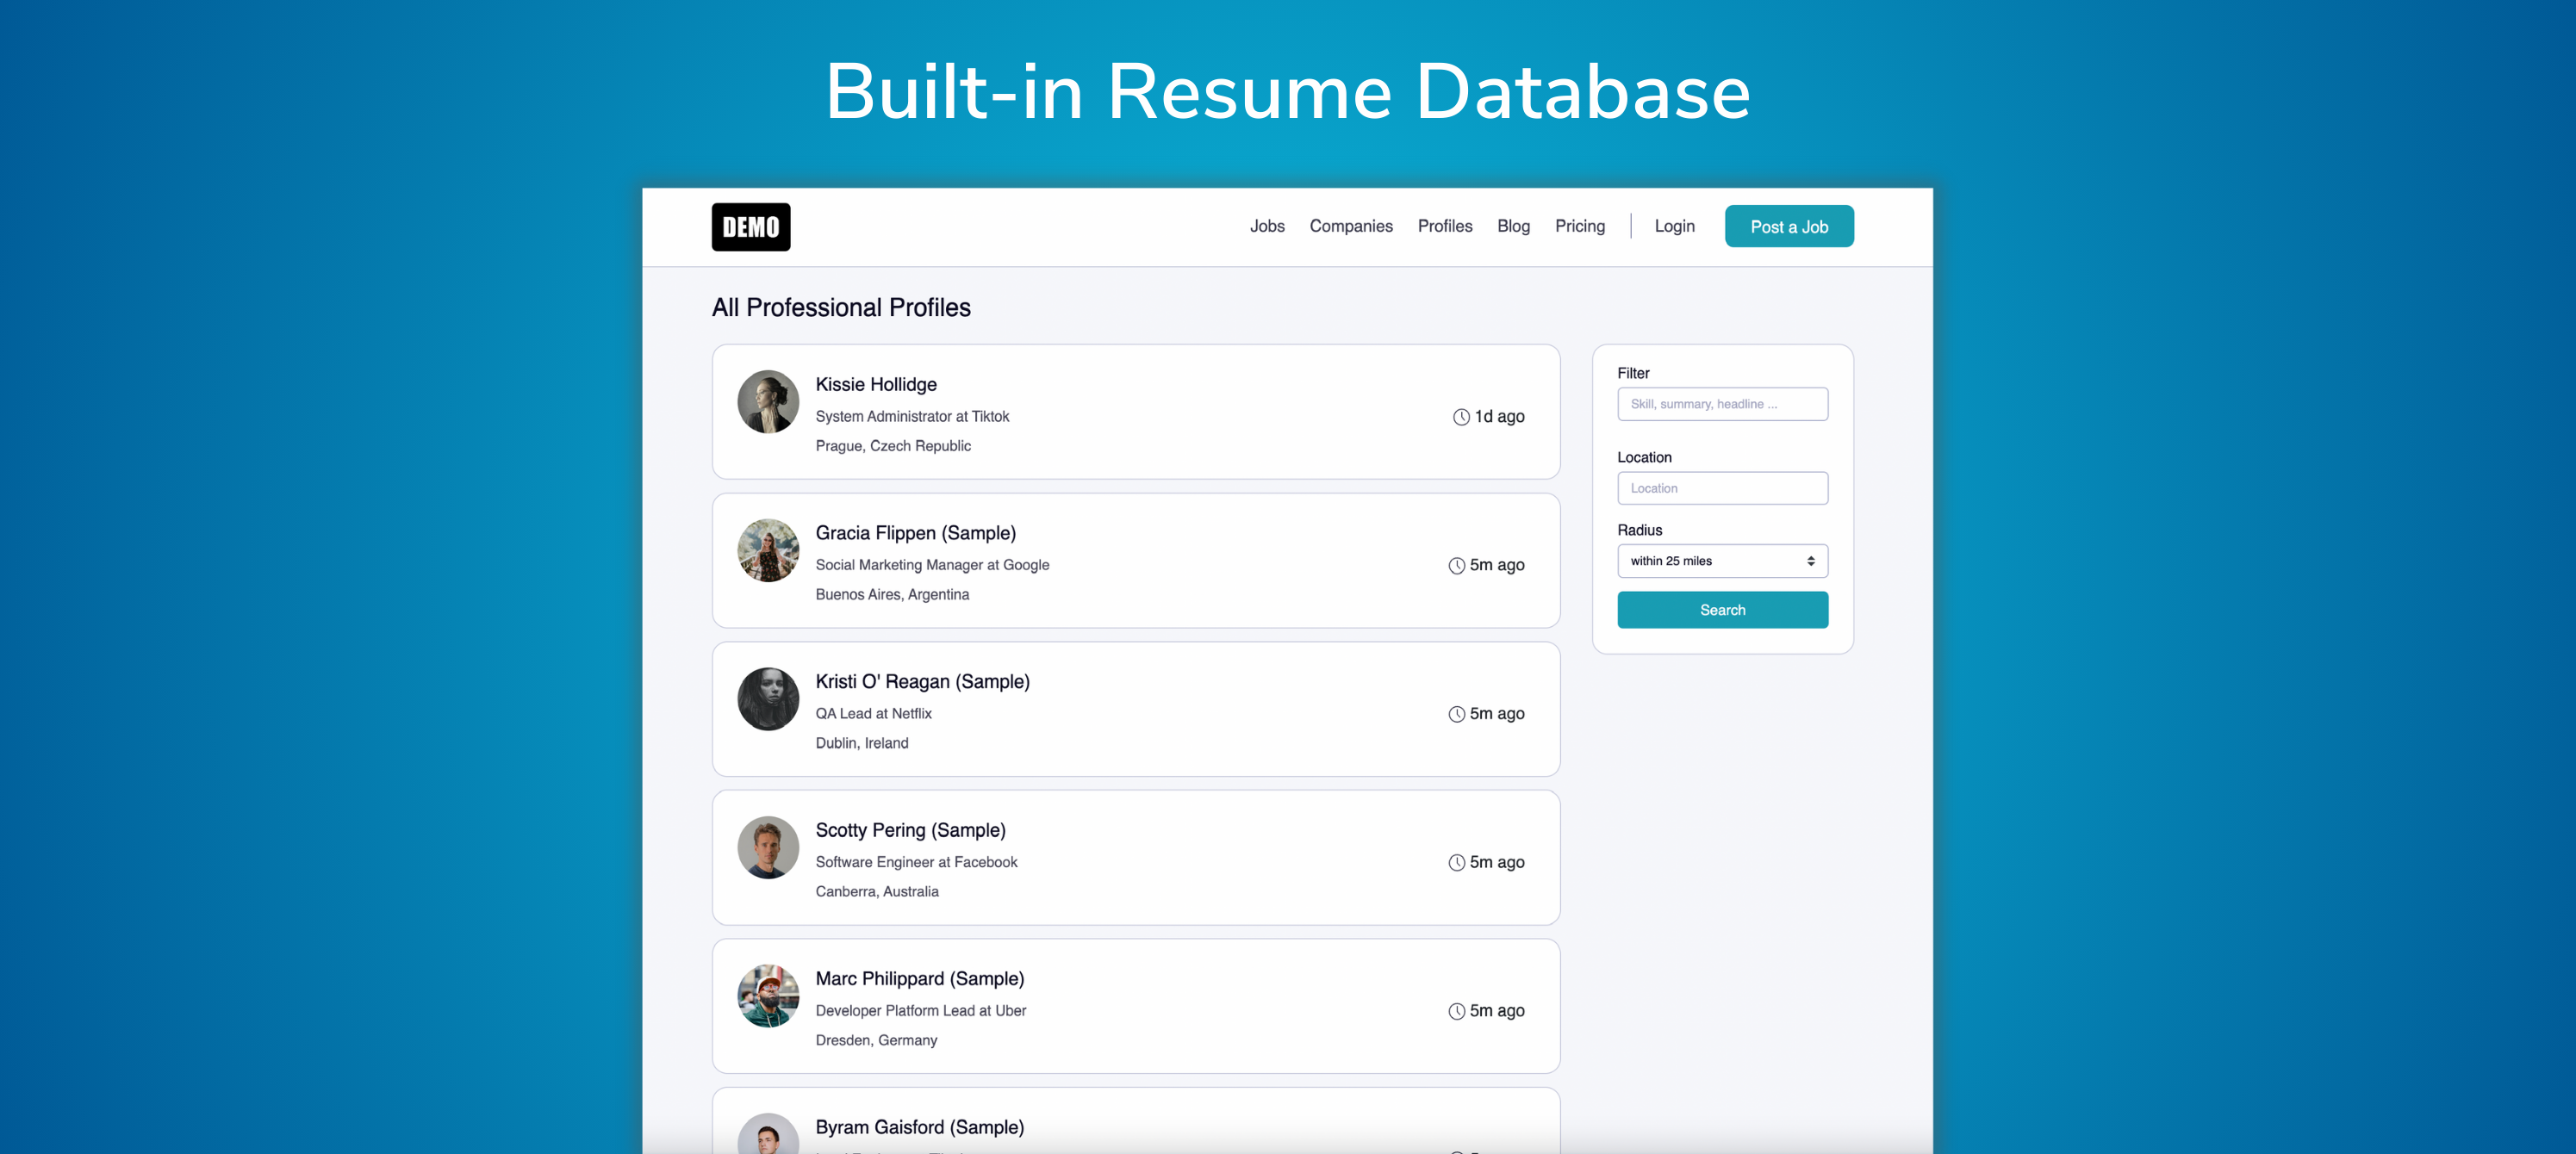 Connect employers with job seekers seamlessly using our user-friendly, built-in resume database